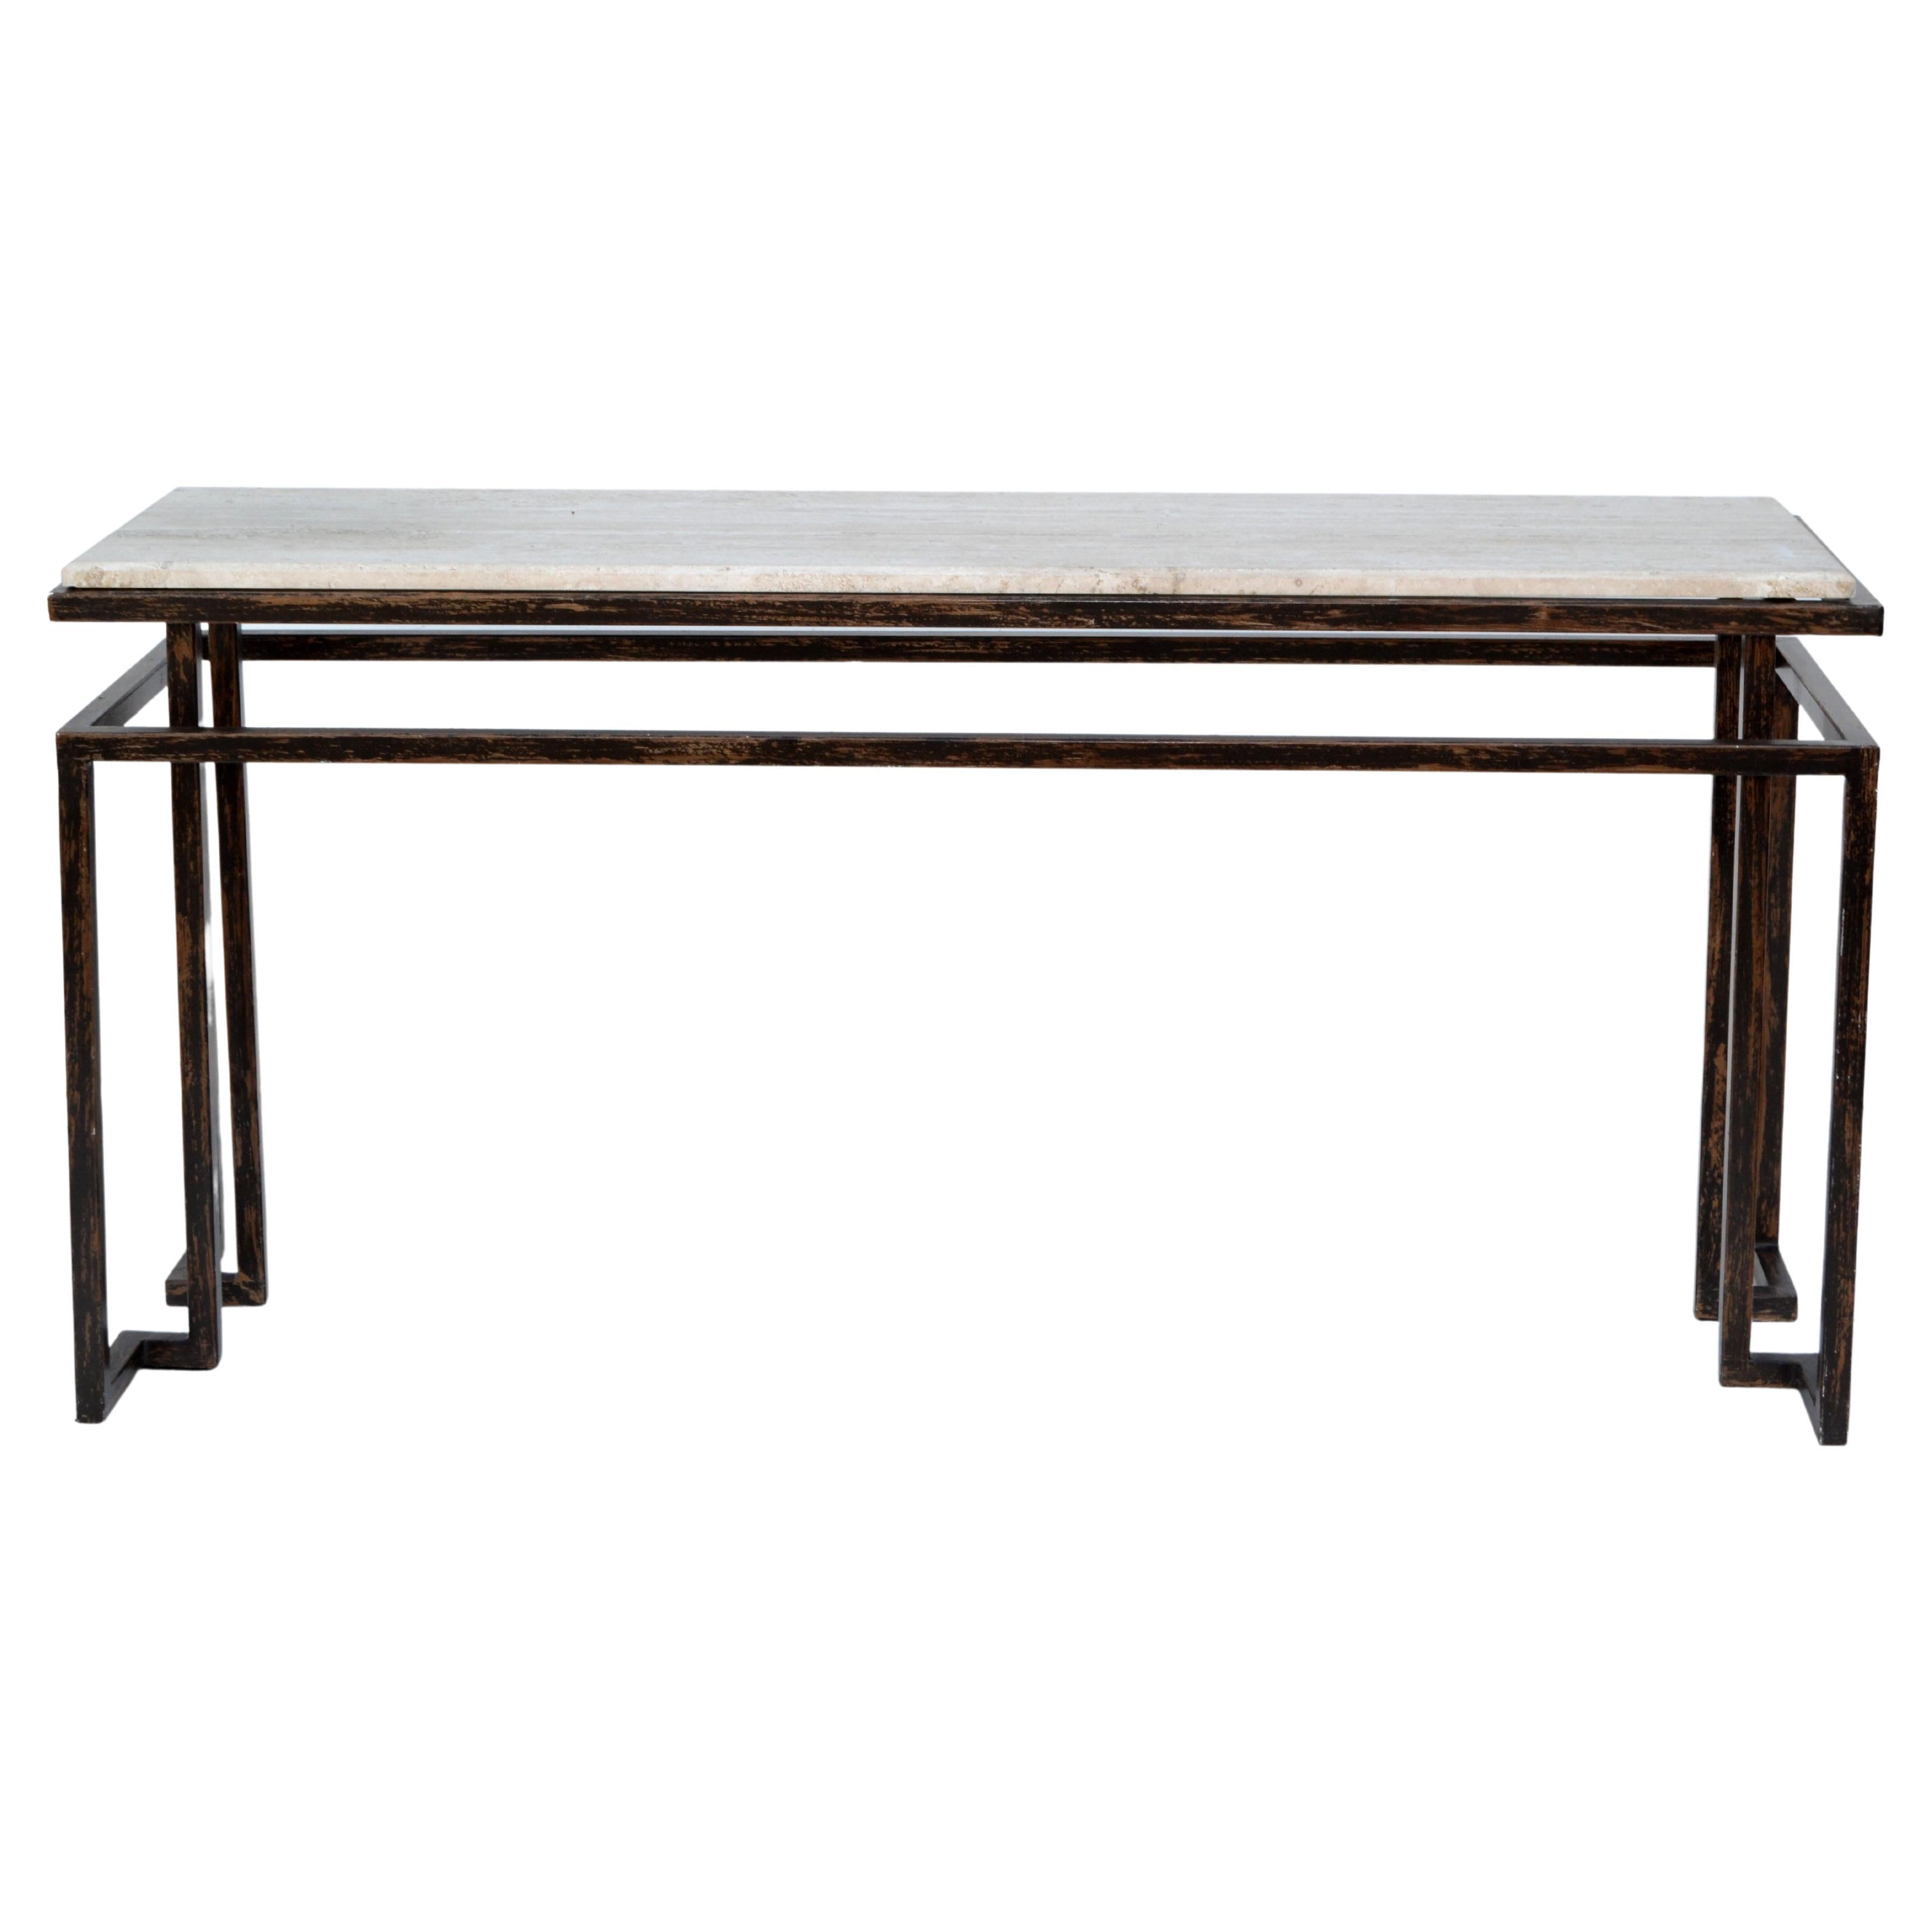 Roche Bobois Minimalist console table in steel with floating Travertine top.
The Steel has a black & bronze finish and the beige Travertine Top is beveled.
In all original condition with some white marks to the steel frame.
Travertine Top